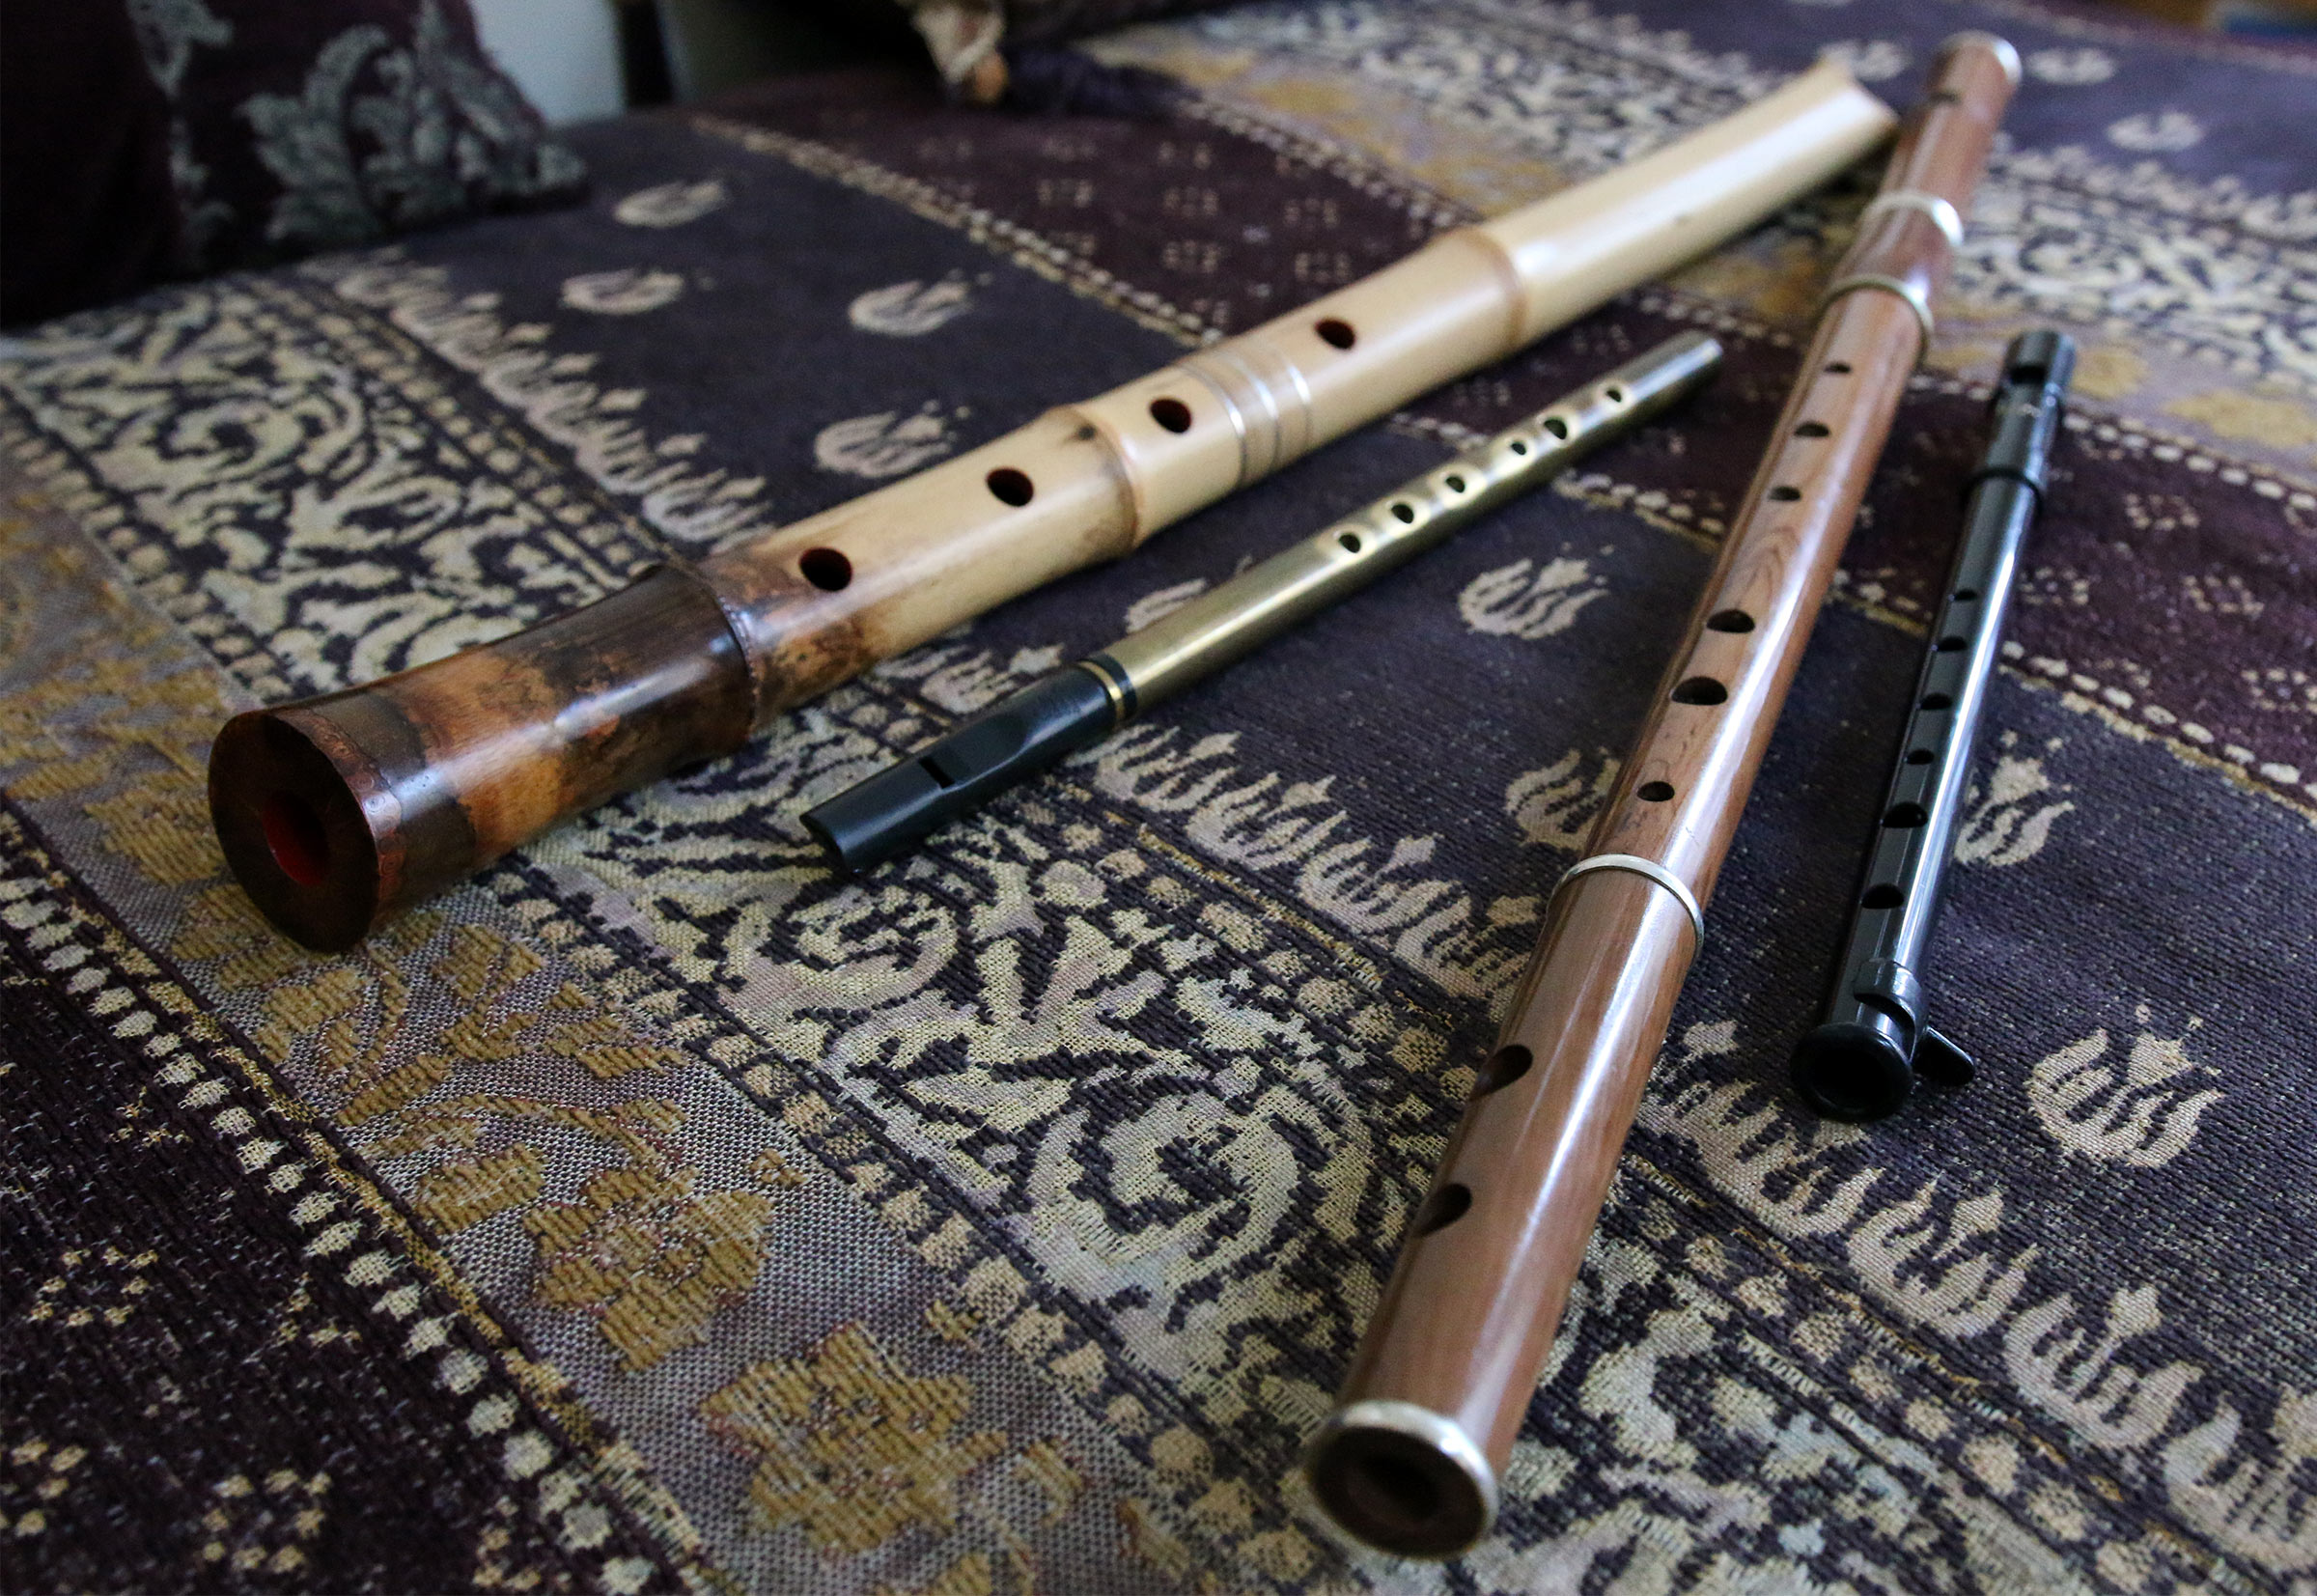 Several of Barbara White's flute including a pennywhistle and a shakuhachi.